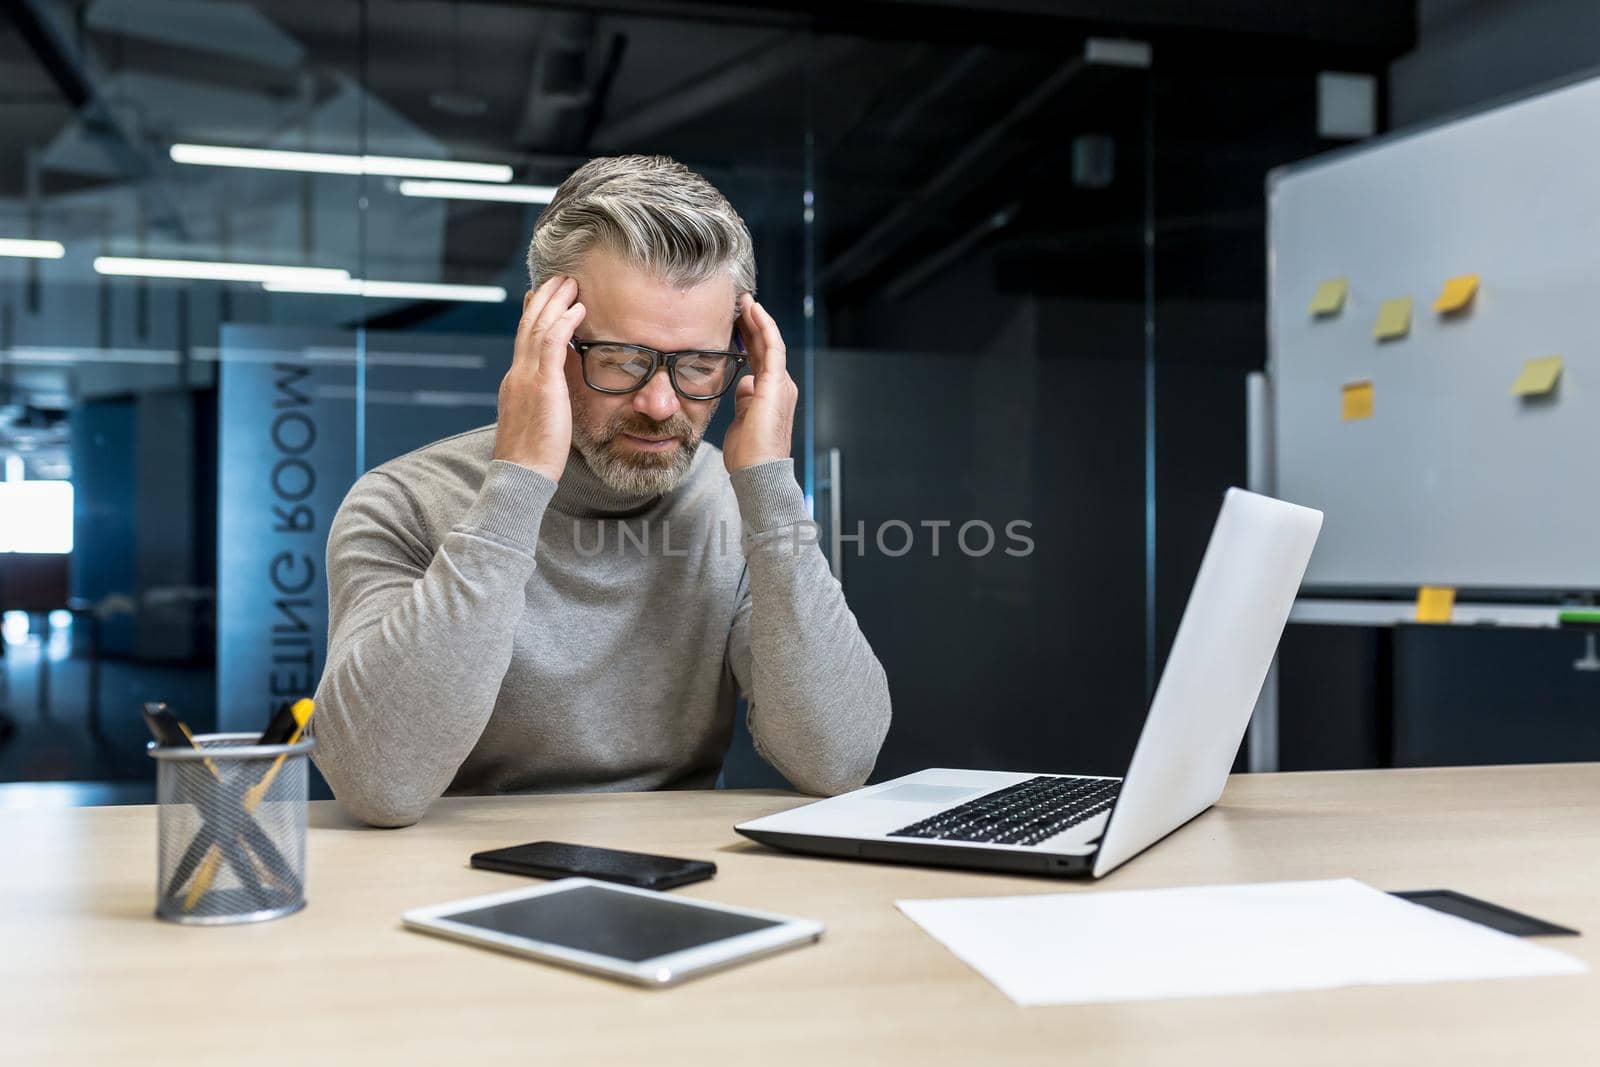 Tension headache at work. A young handsome gray-haired male businessman in glasses sits in the office at a desk with a laptop and a phone, feels a headache, holds his head with his hands.